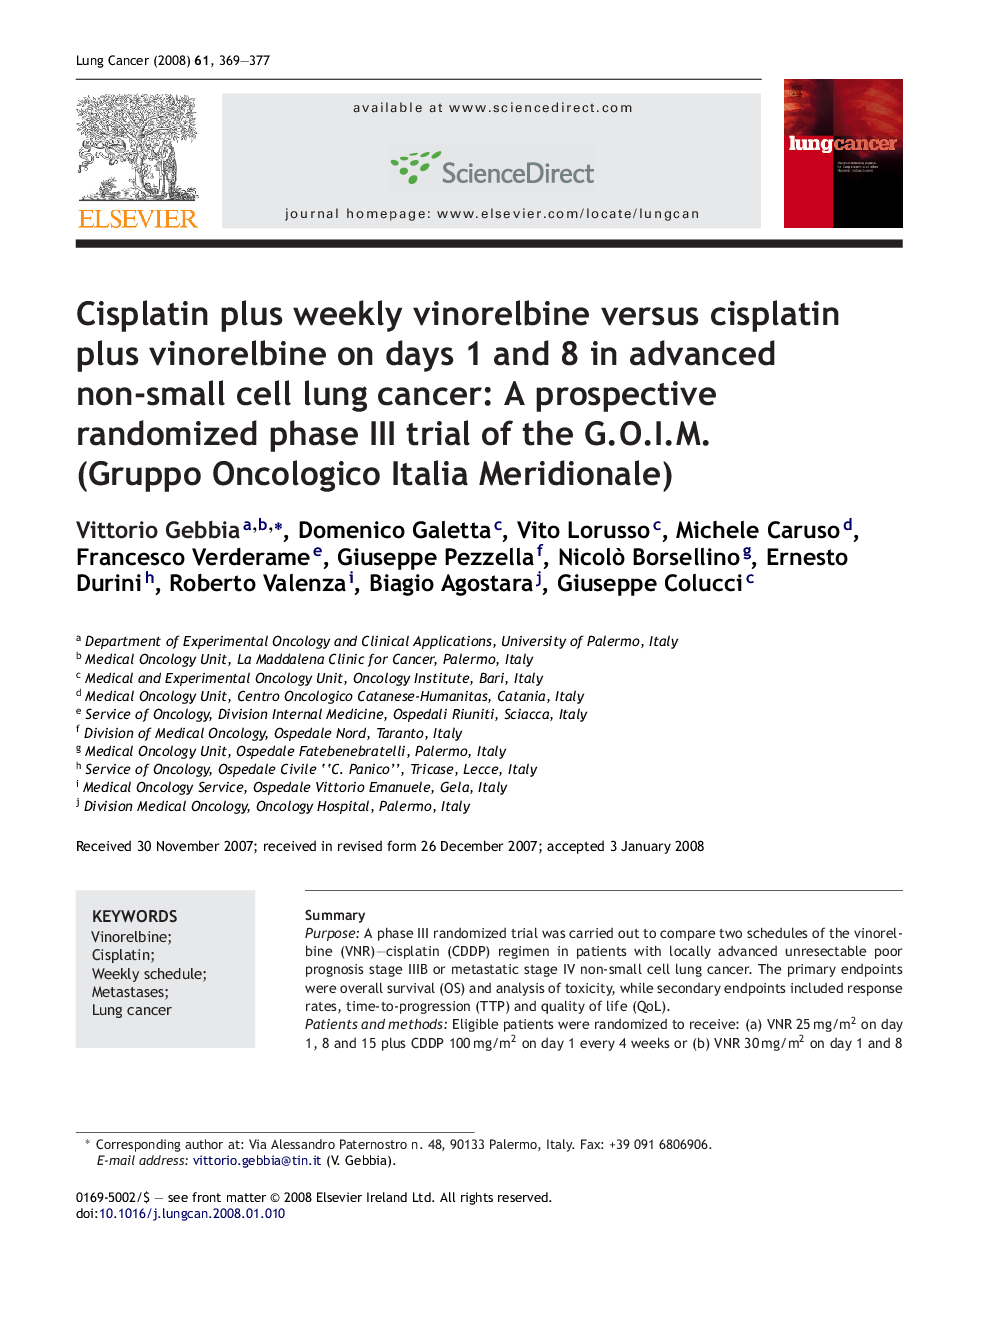 Cisplatin plus weekly vinorelbine versus cisplatin plus vinorelbine on days 1 and 8 in advanced non-small cell lung cancer: A prospective randomized phase III trial of the G.O.I.M. (Gruppo Oncologico Italia Meridionale)